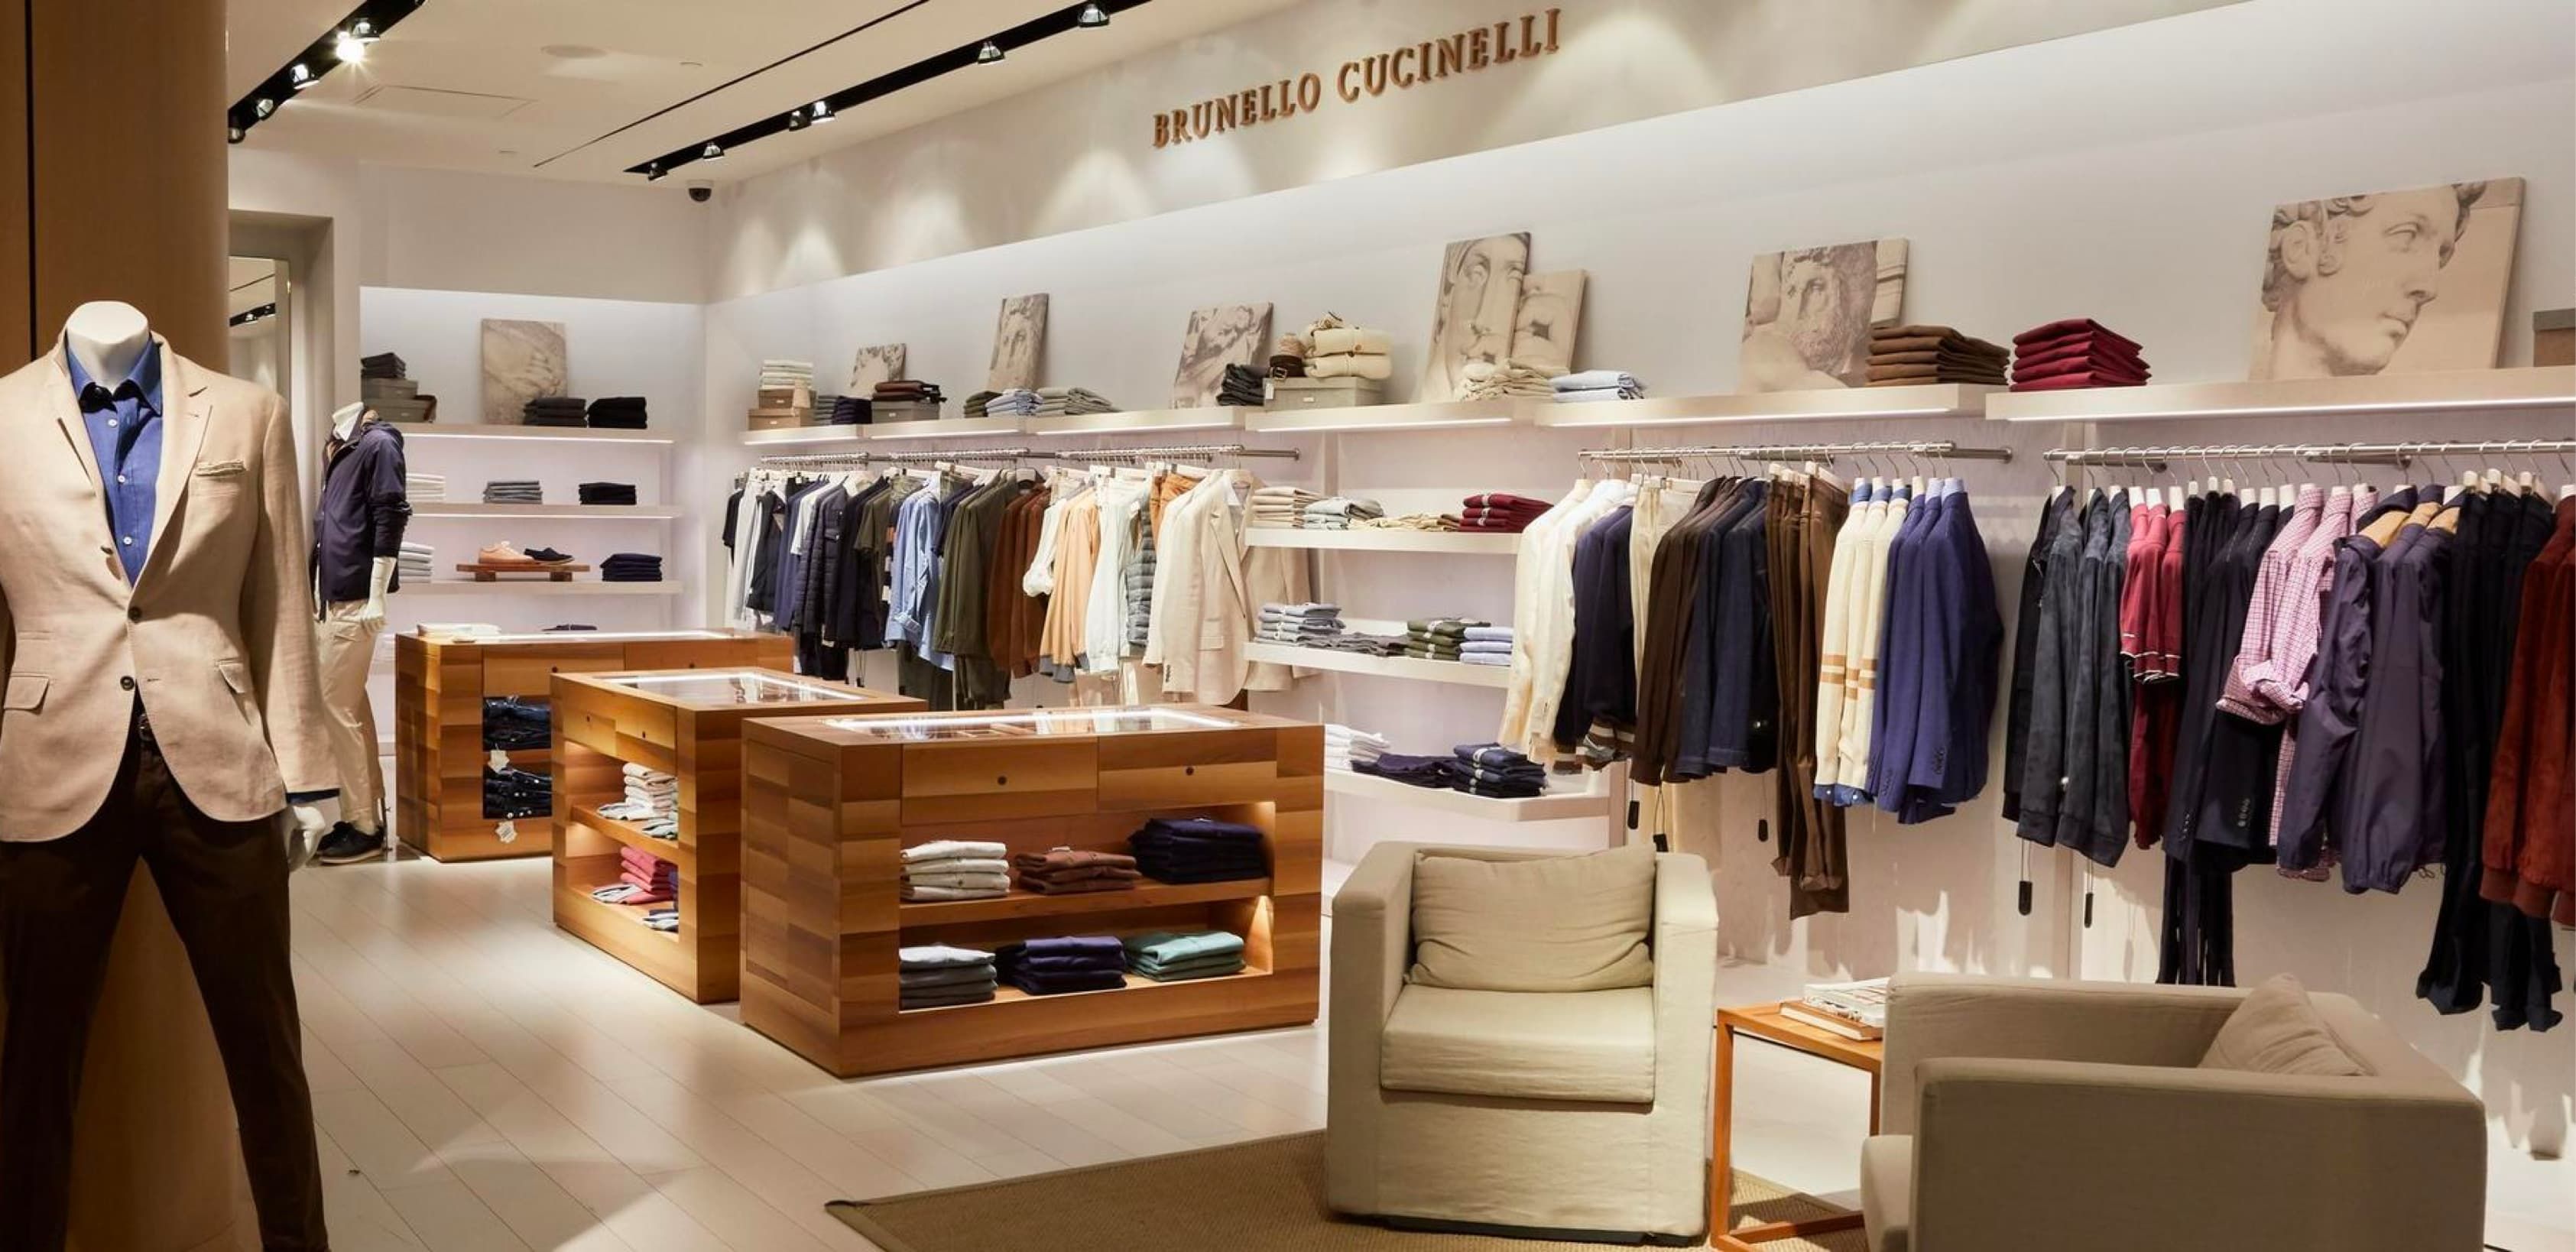 Inside a Harry Rosen retail store. The wall features designer clothes from Bruno Cucinelli.